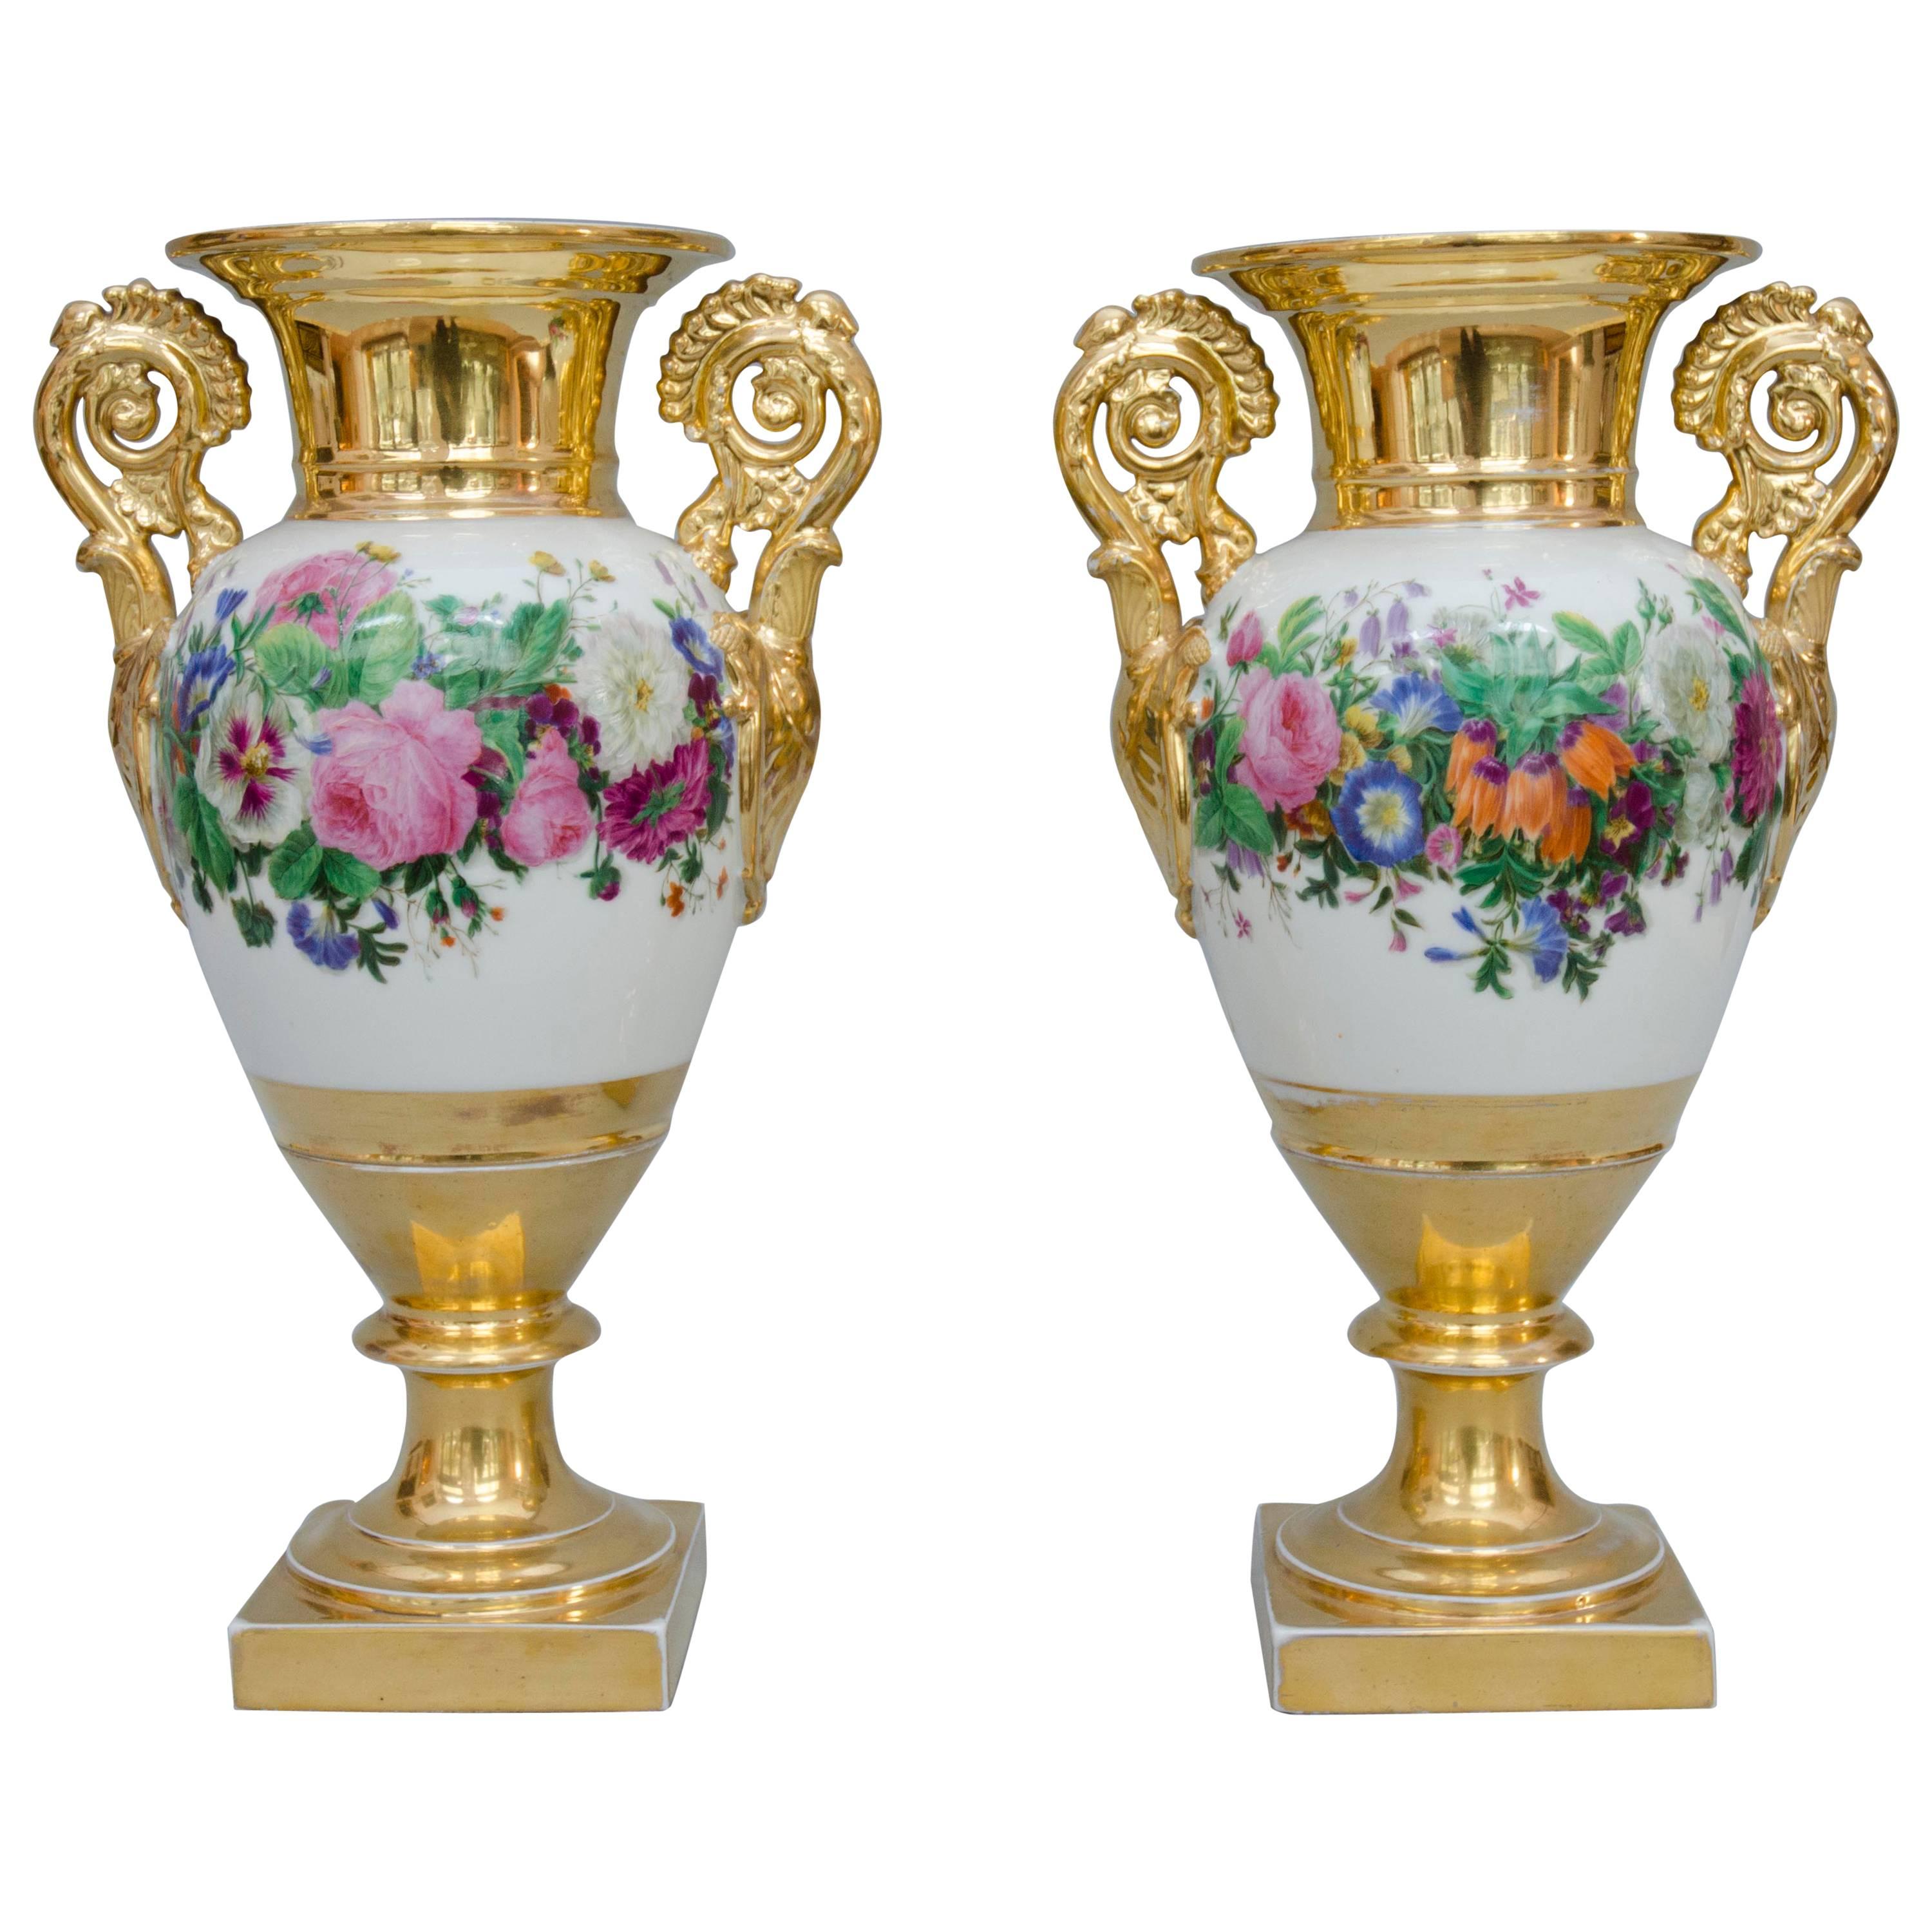 Mid-19th Century Large Pair of Egg Shaped Vases with Garlands of Flowers, Paris For Sale